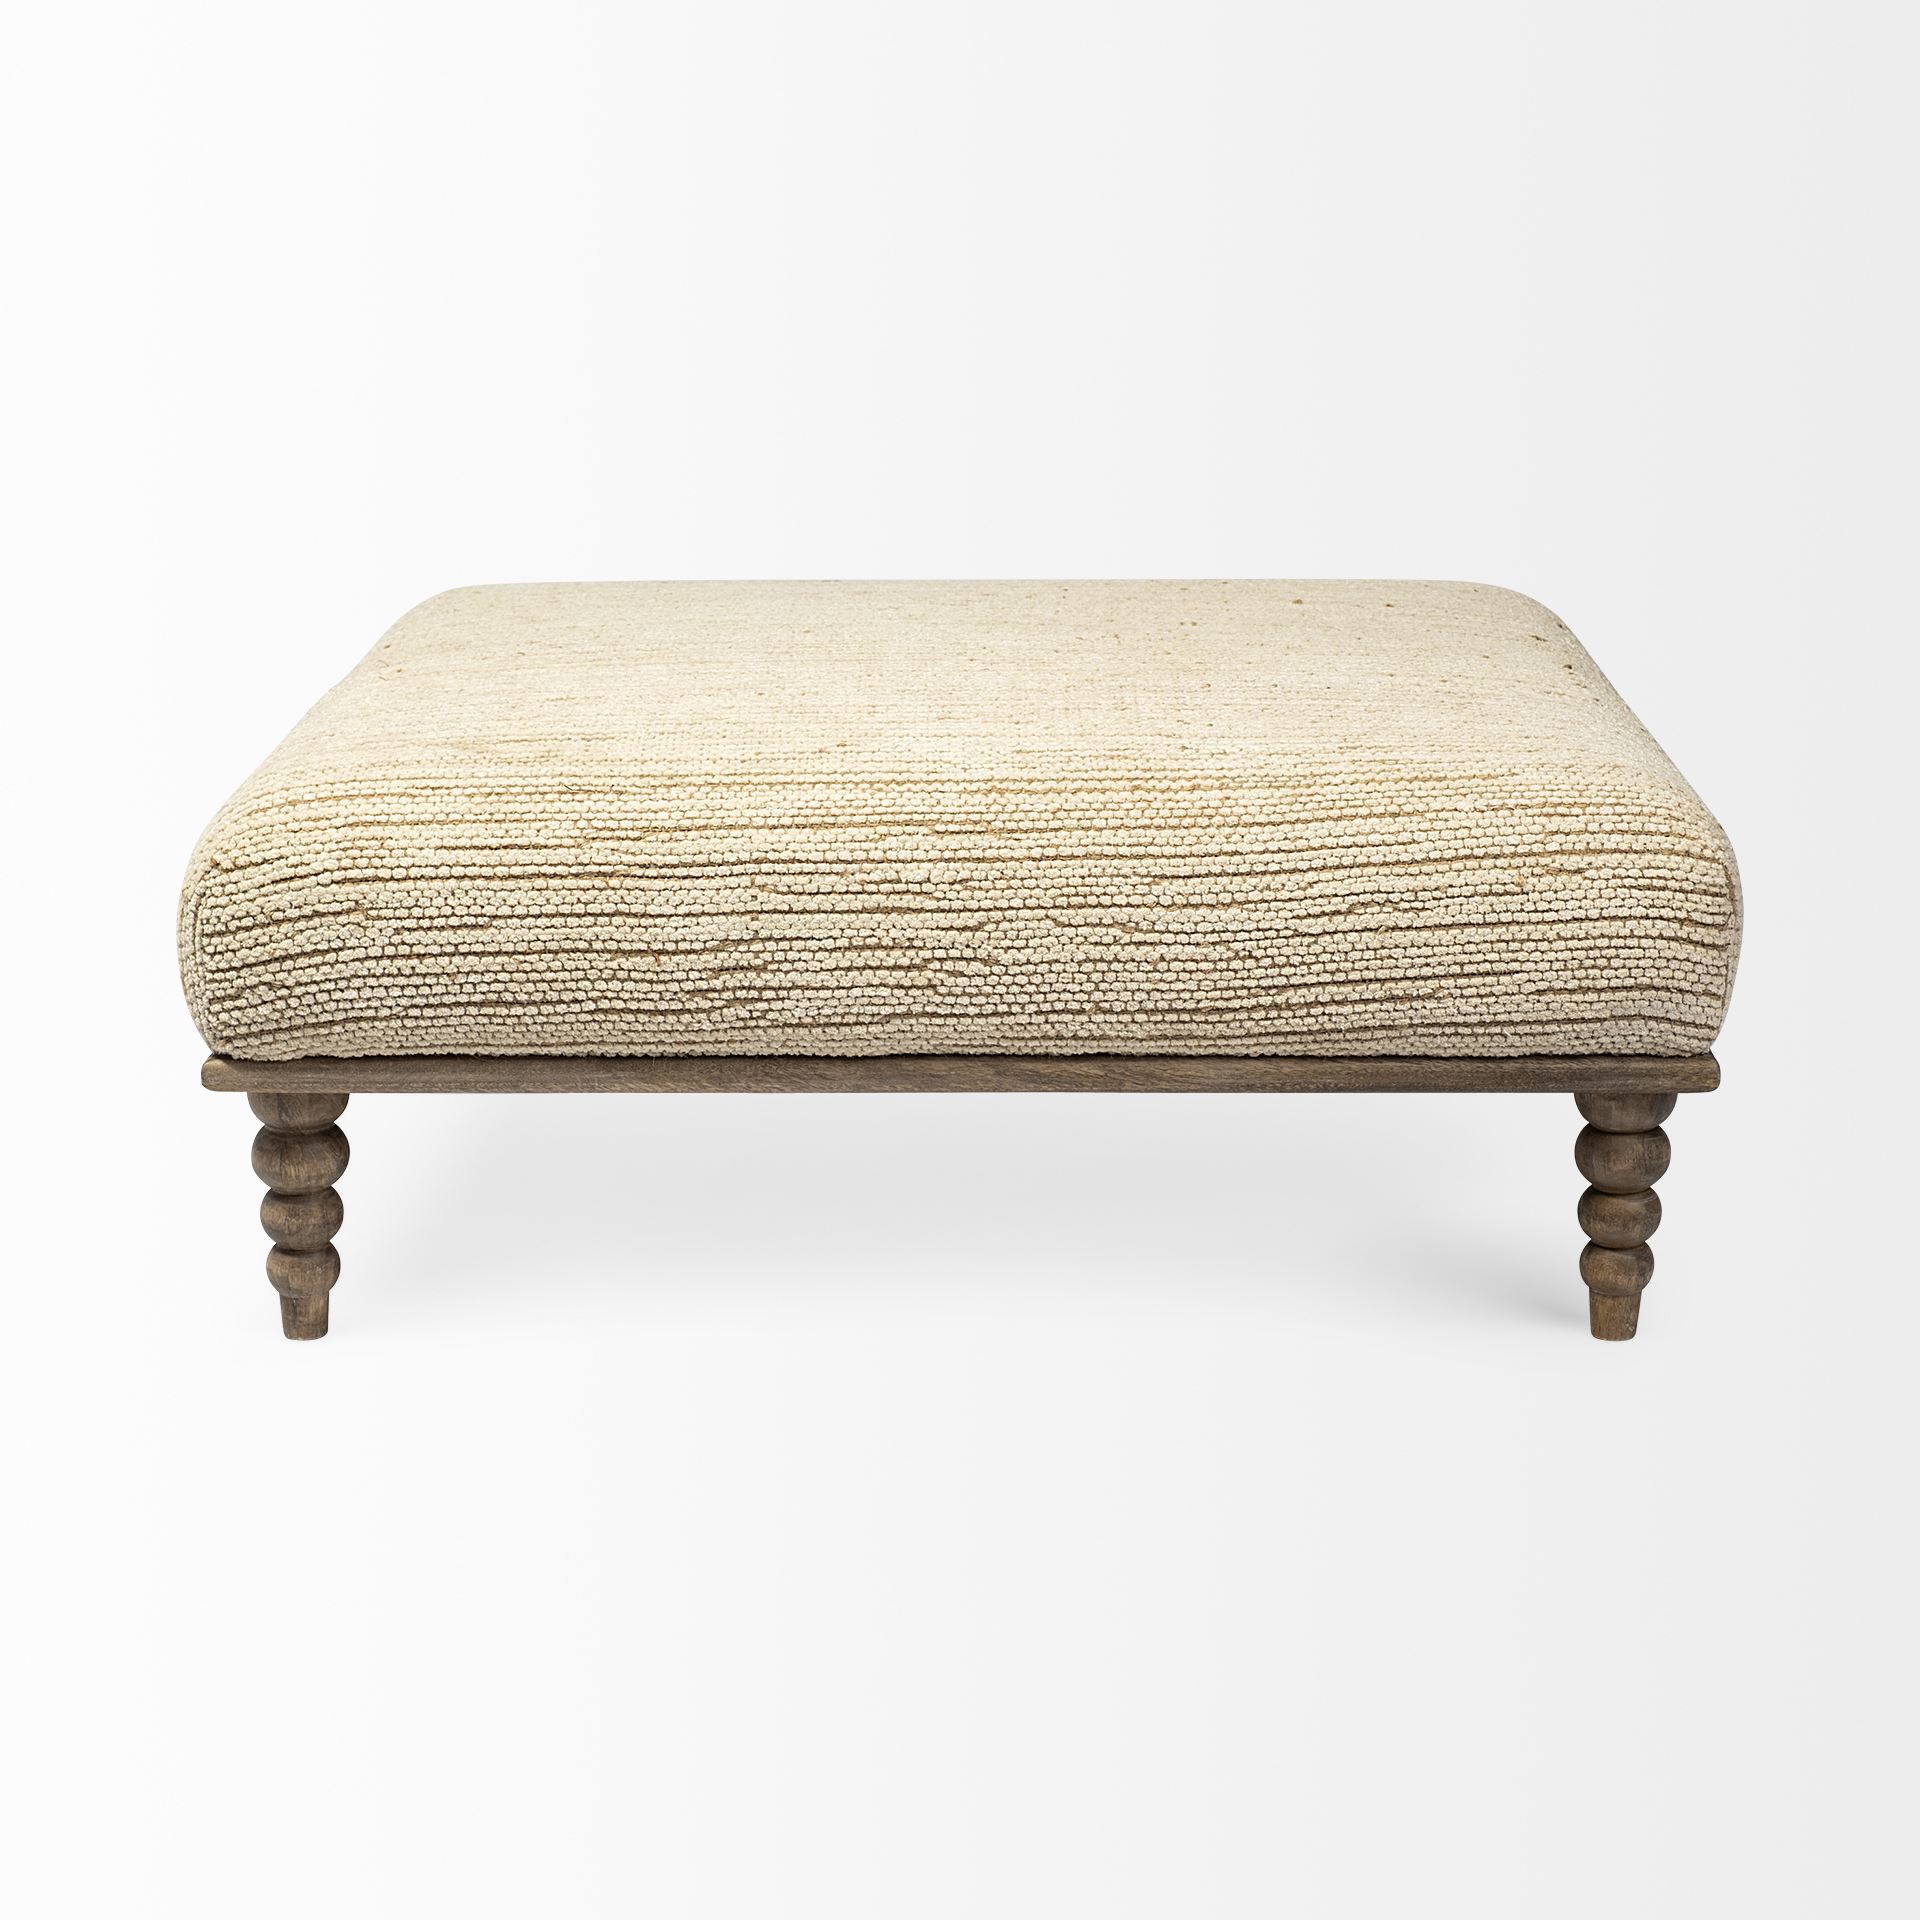 Square Indian Mango Wood/Natural-Brown Polished W/ Upholstered Cream Seat Accent Bench